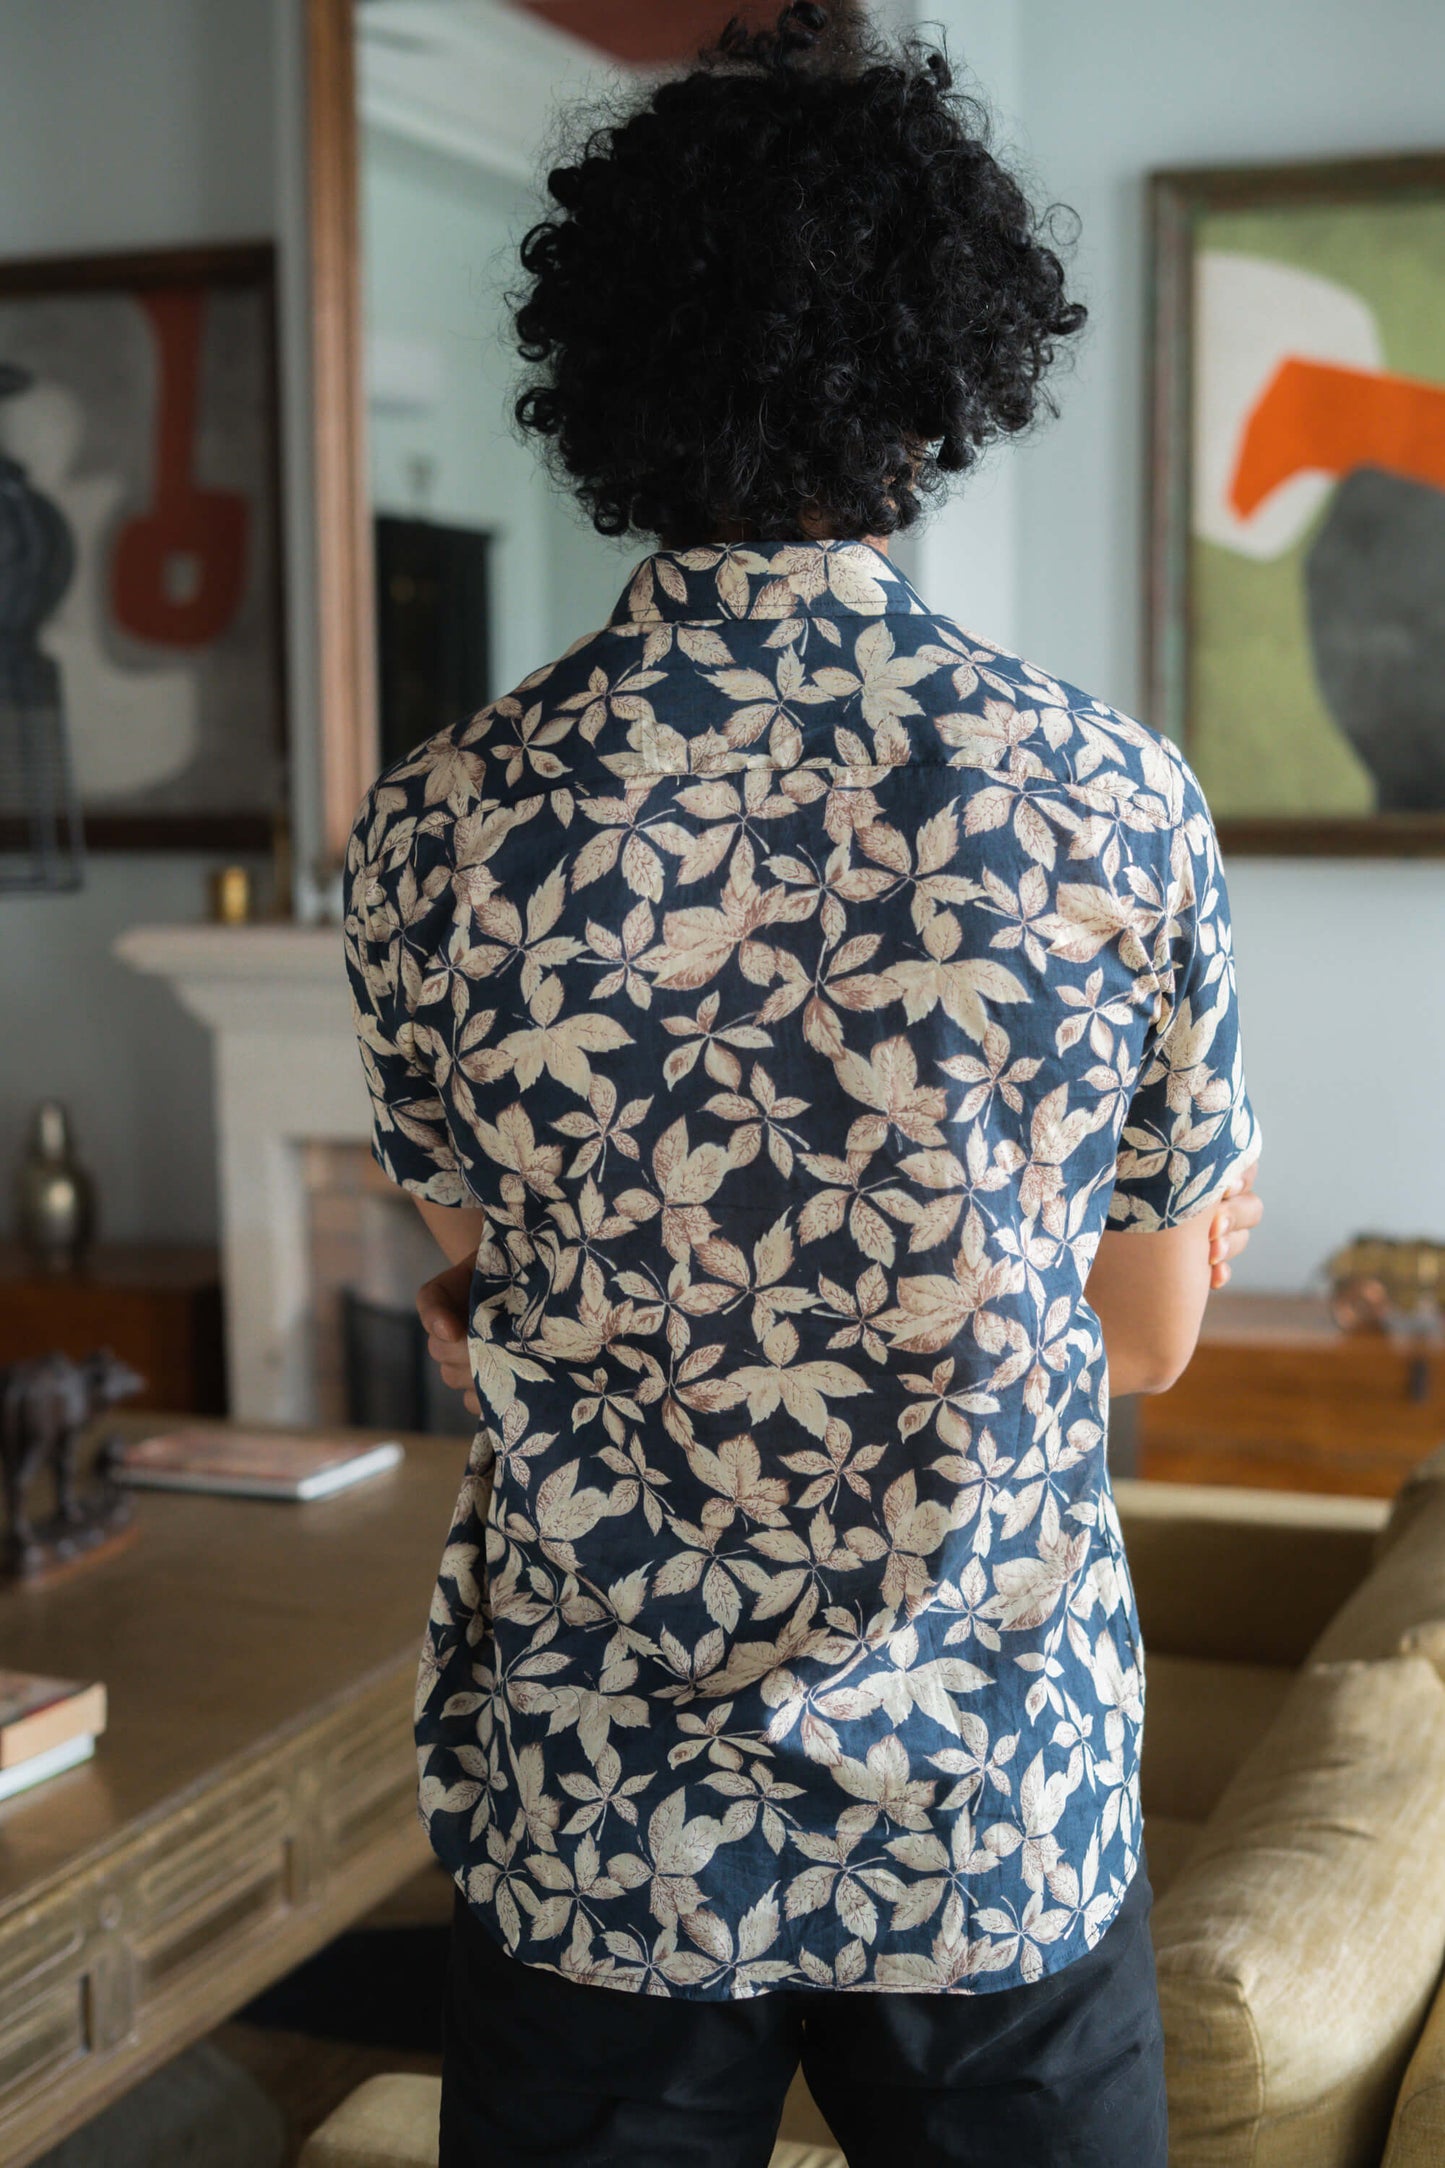 The Very Dark Blue All-Over Floral Print Shirt (Half Sleeves)